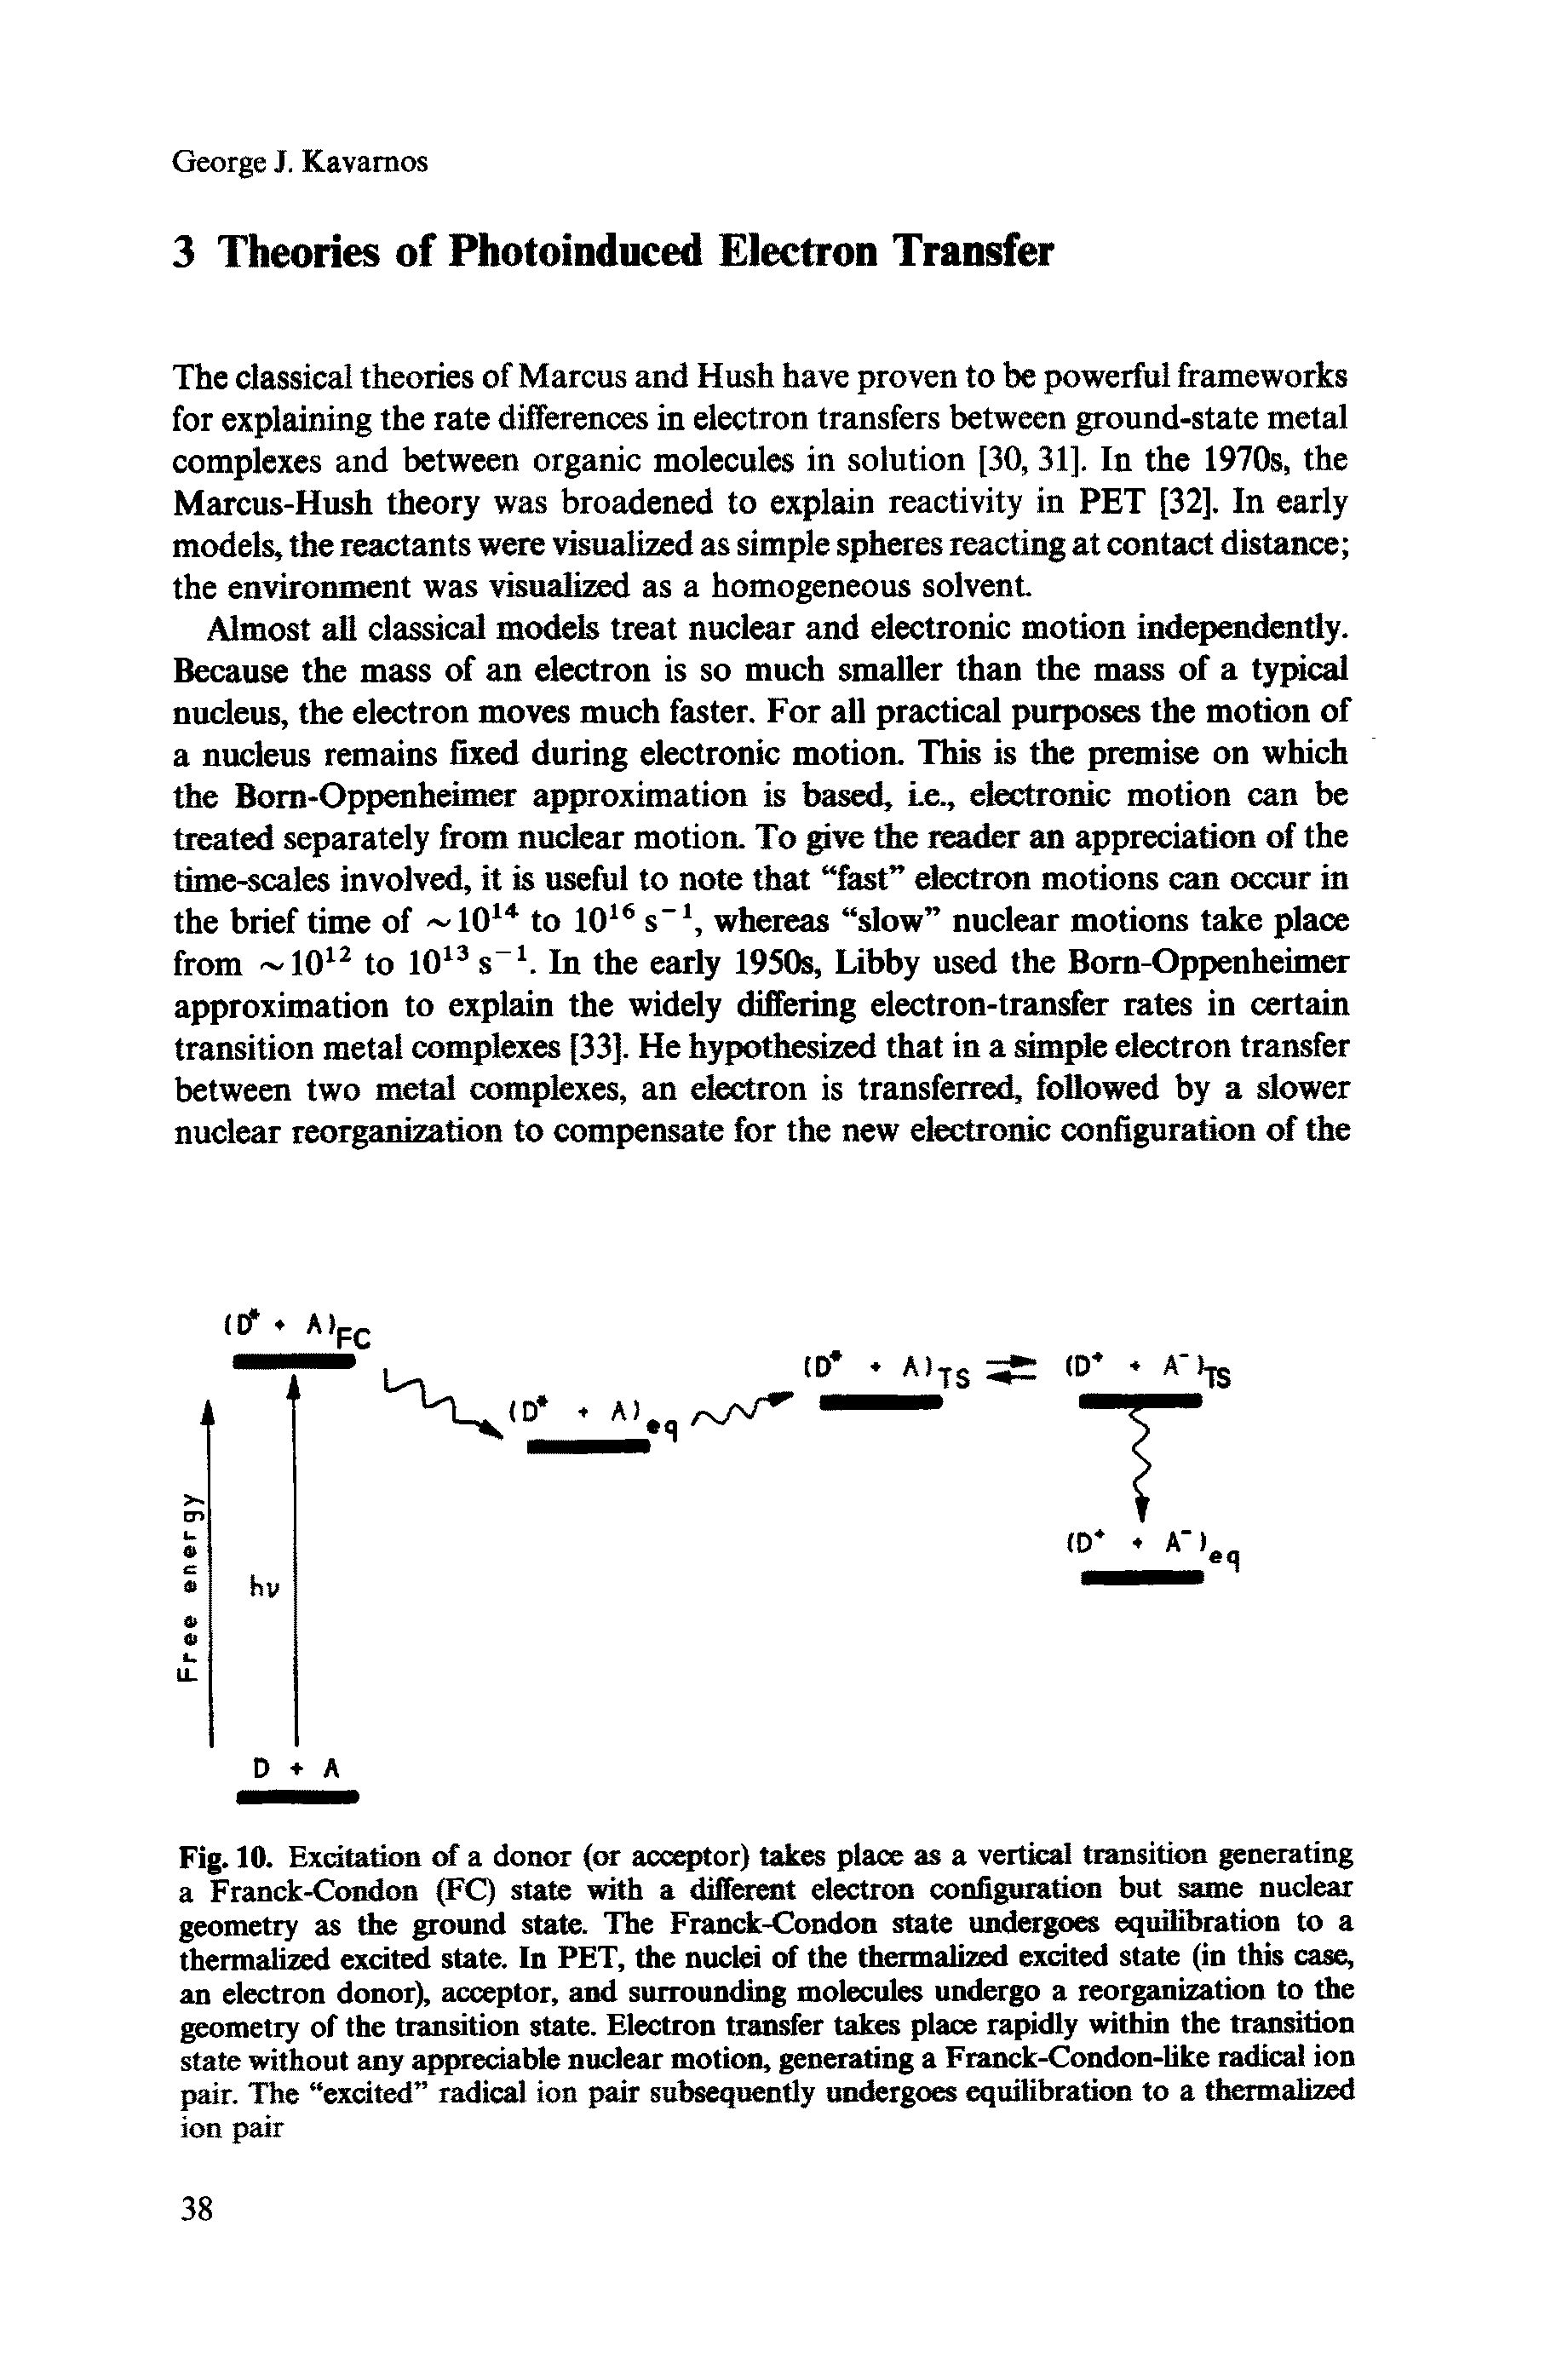 Fig. 10. Excitation of a donor (or acceptor) takes place as a vertical transition generating a Franck-Condon (FC) state with a different electron configuration but same nuclear geometry as the ground state. The Franck-Condon state undergoes equilibration to a thermalized excited state. In PET, the nuclei of the thermalized excited state (in this case, an electron donor), acceptor, and surrounding molecules undergo a reorganization to the geometry of the transition state. Electron transfer takes place rapidly within the transition state without any appreciable nuclear motion, generating a Franck-Condon-like radical ion pair. The excited radical ion pair subsequently undergoes equilibration to a thermalized ion pair...